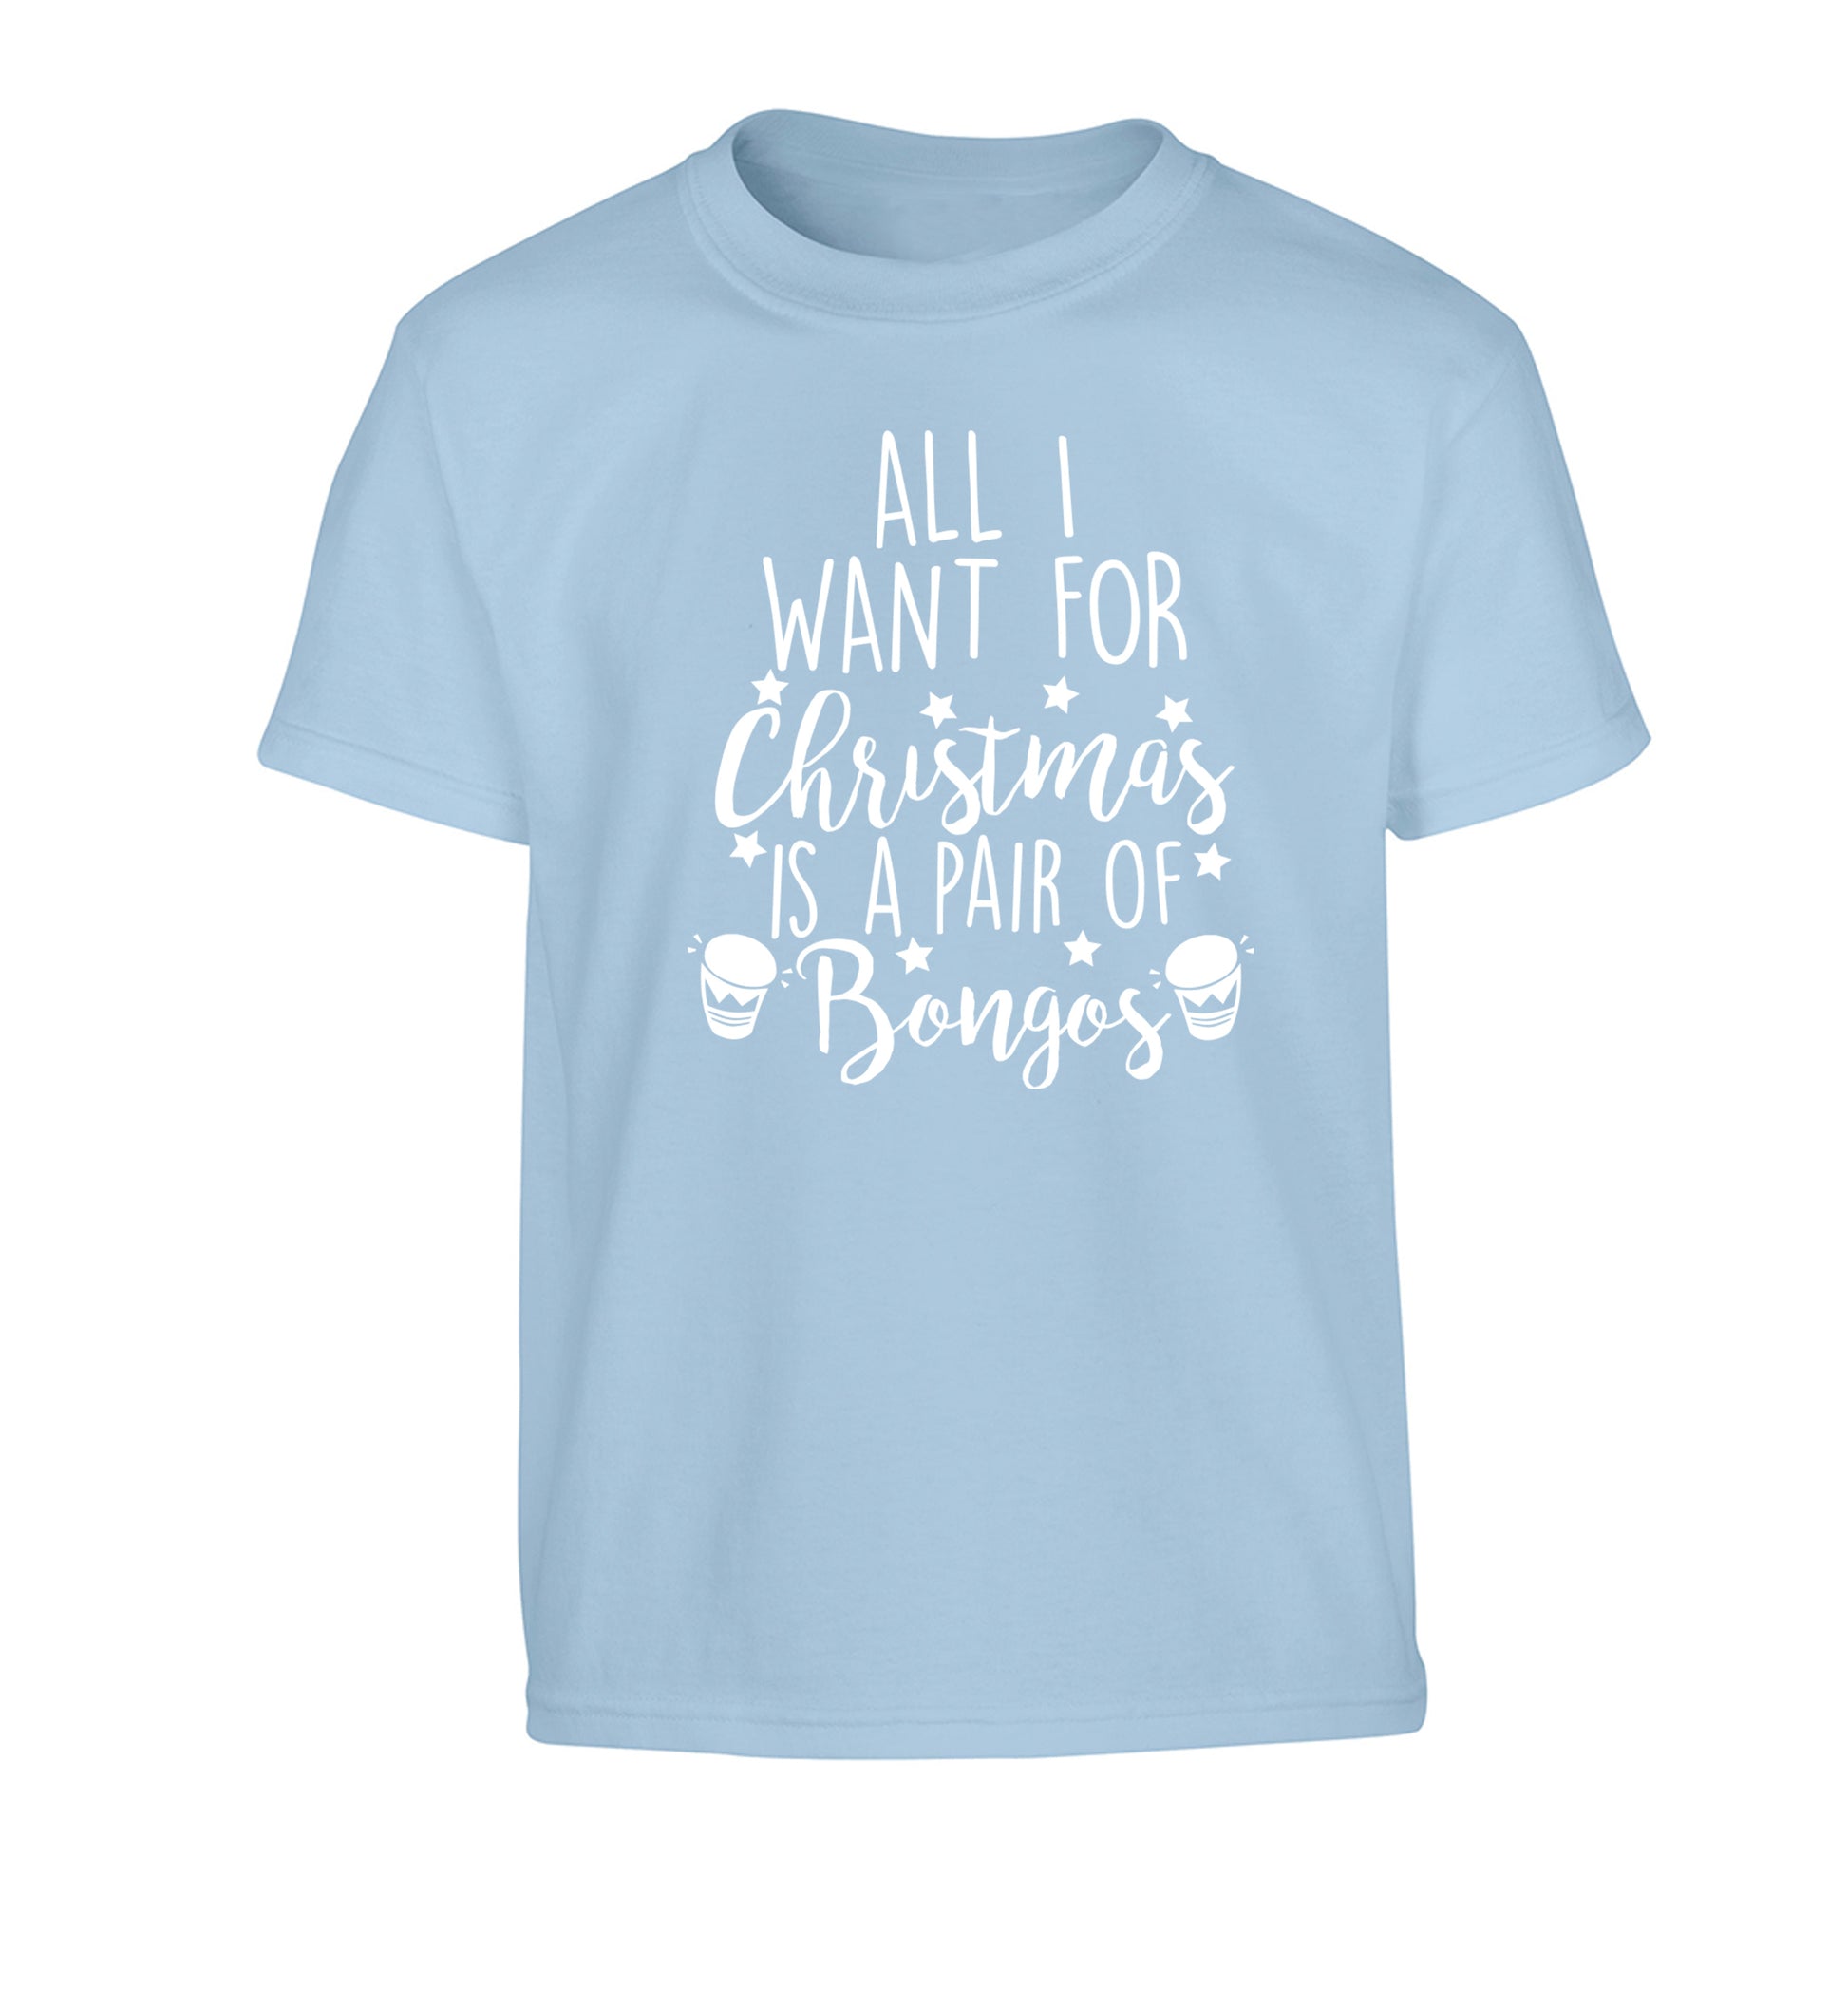 All I want for Christmas is a pair of bongos! Children's light blue Tshirt 12-14 Years